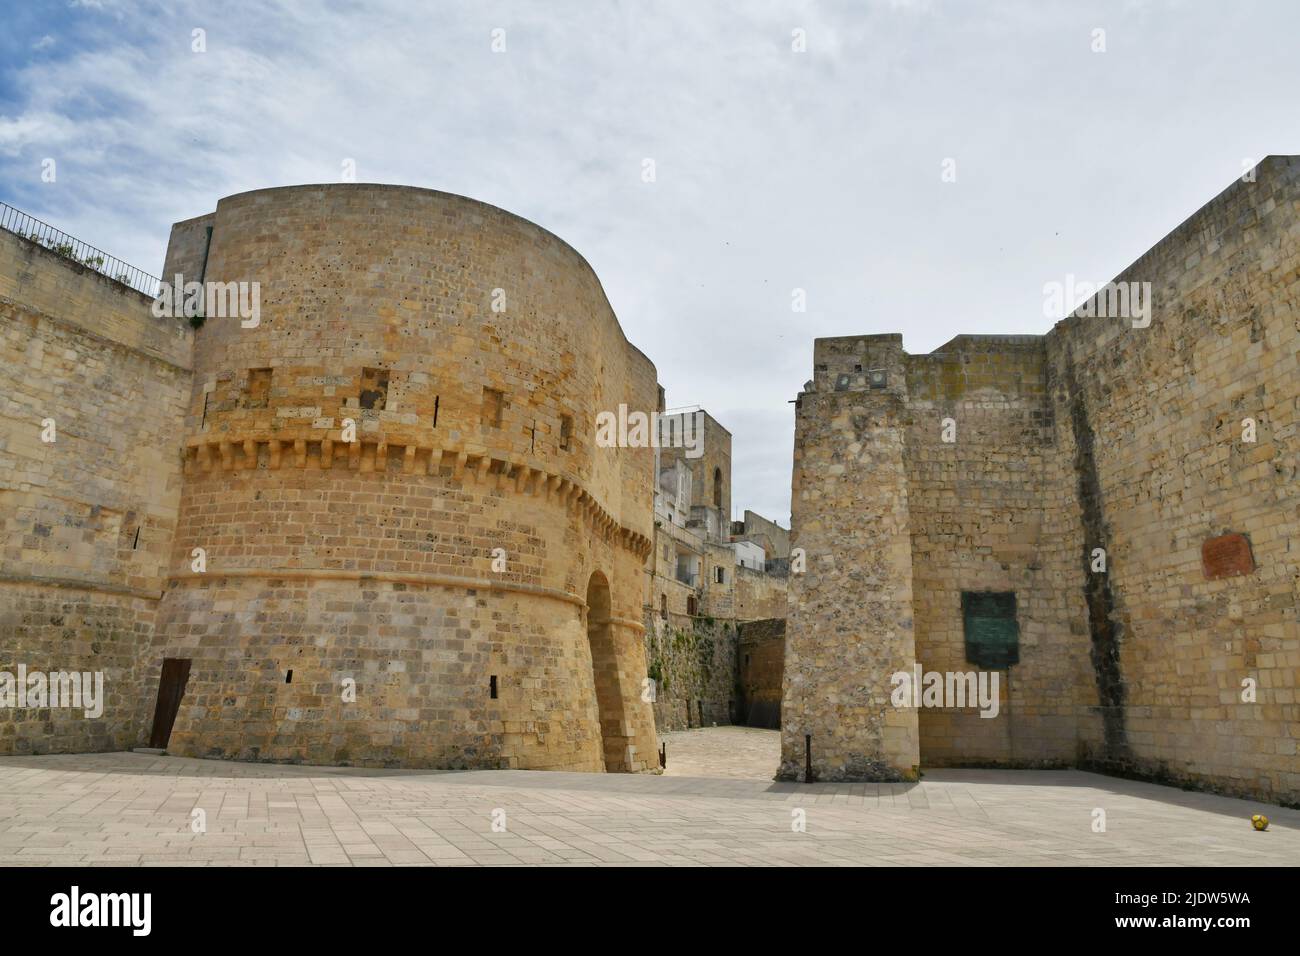 The towers and walls of an Aragonese castle that defended the city of Otranto from pirate attack, Italy. Stock Photo